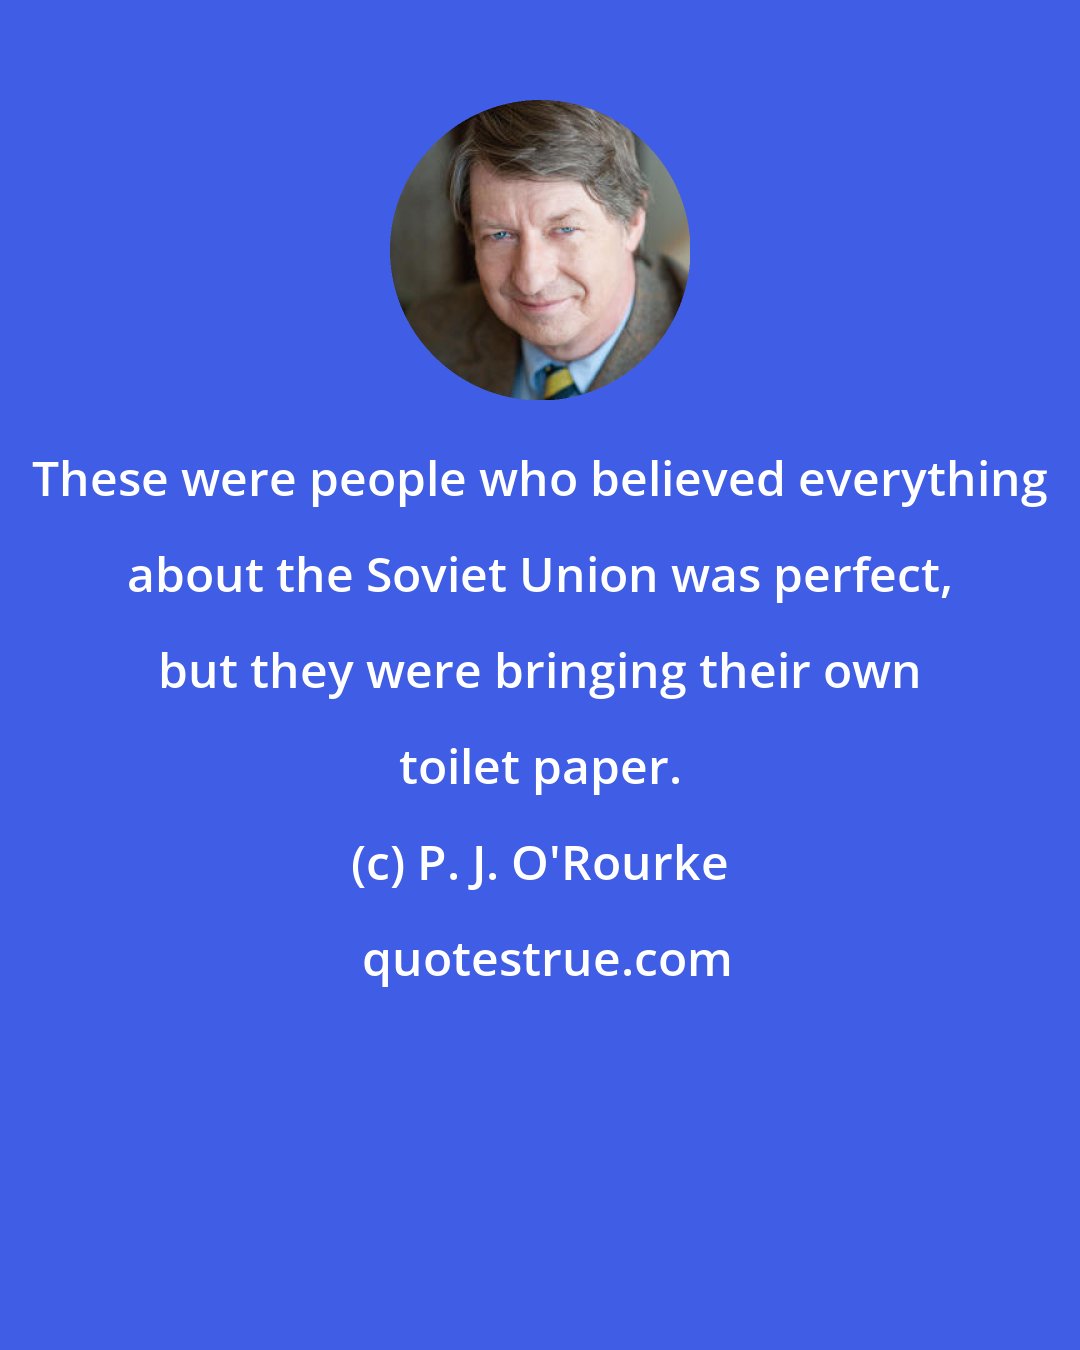 P. J. O'Rourke: These were people who believed everything about the Soviet Union was perfect, but they were bringing their own toilet paper.